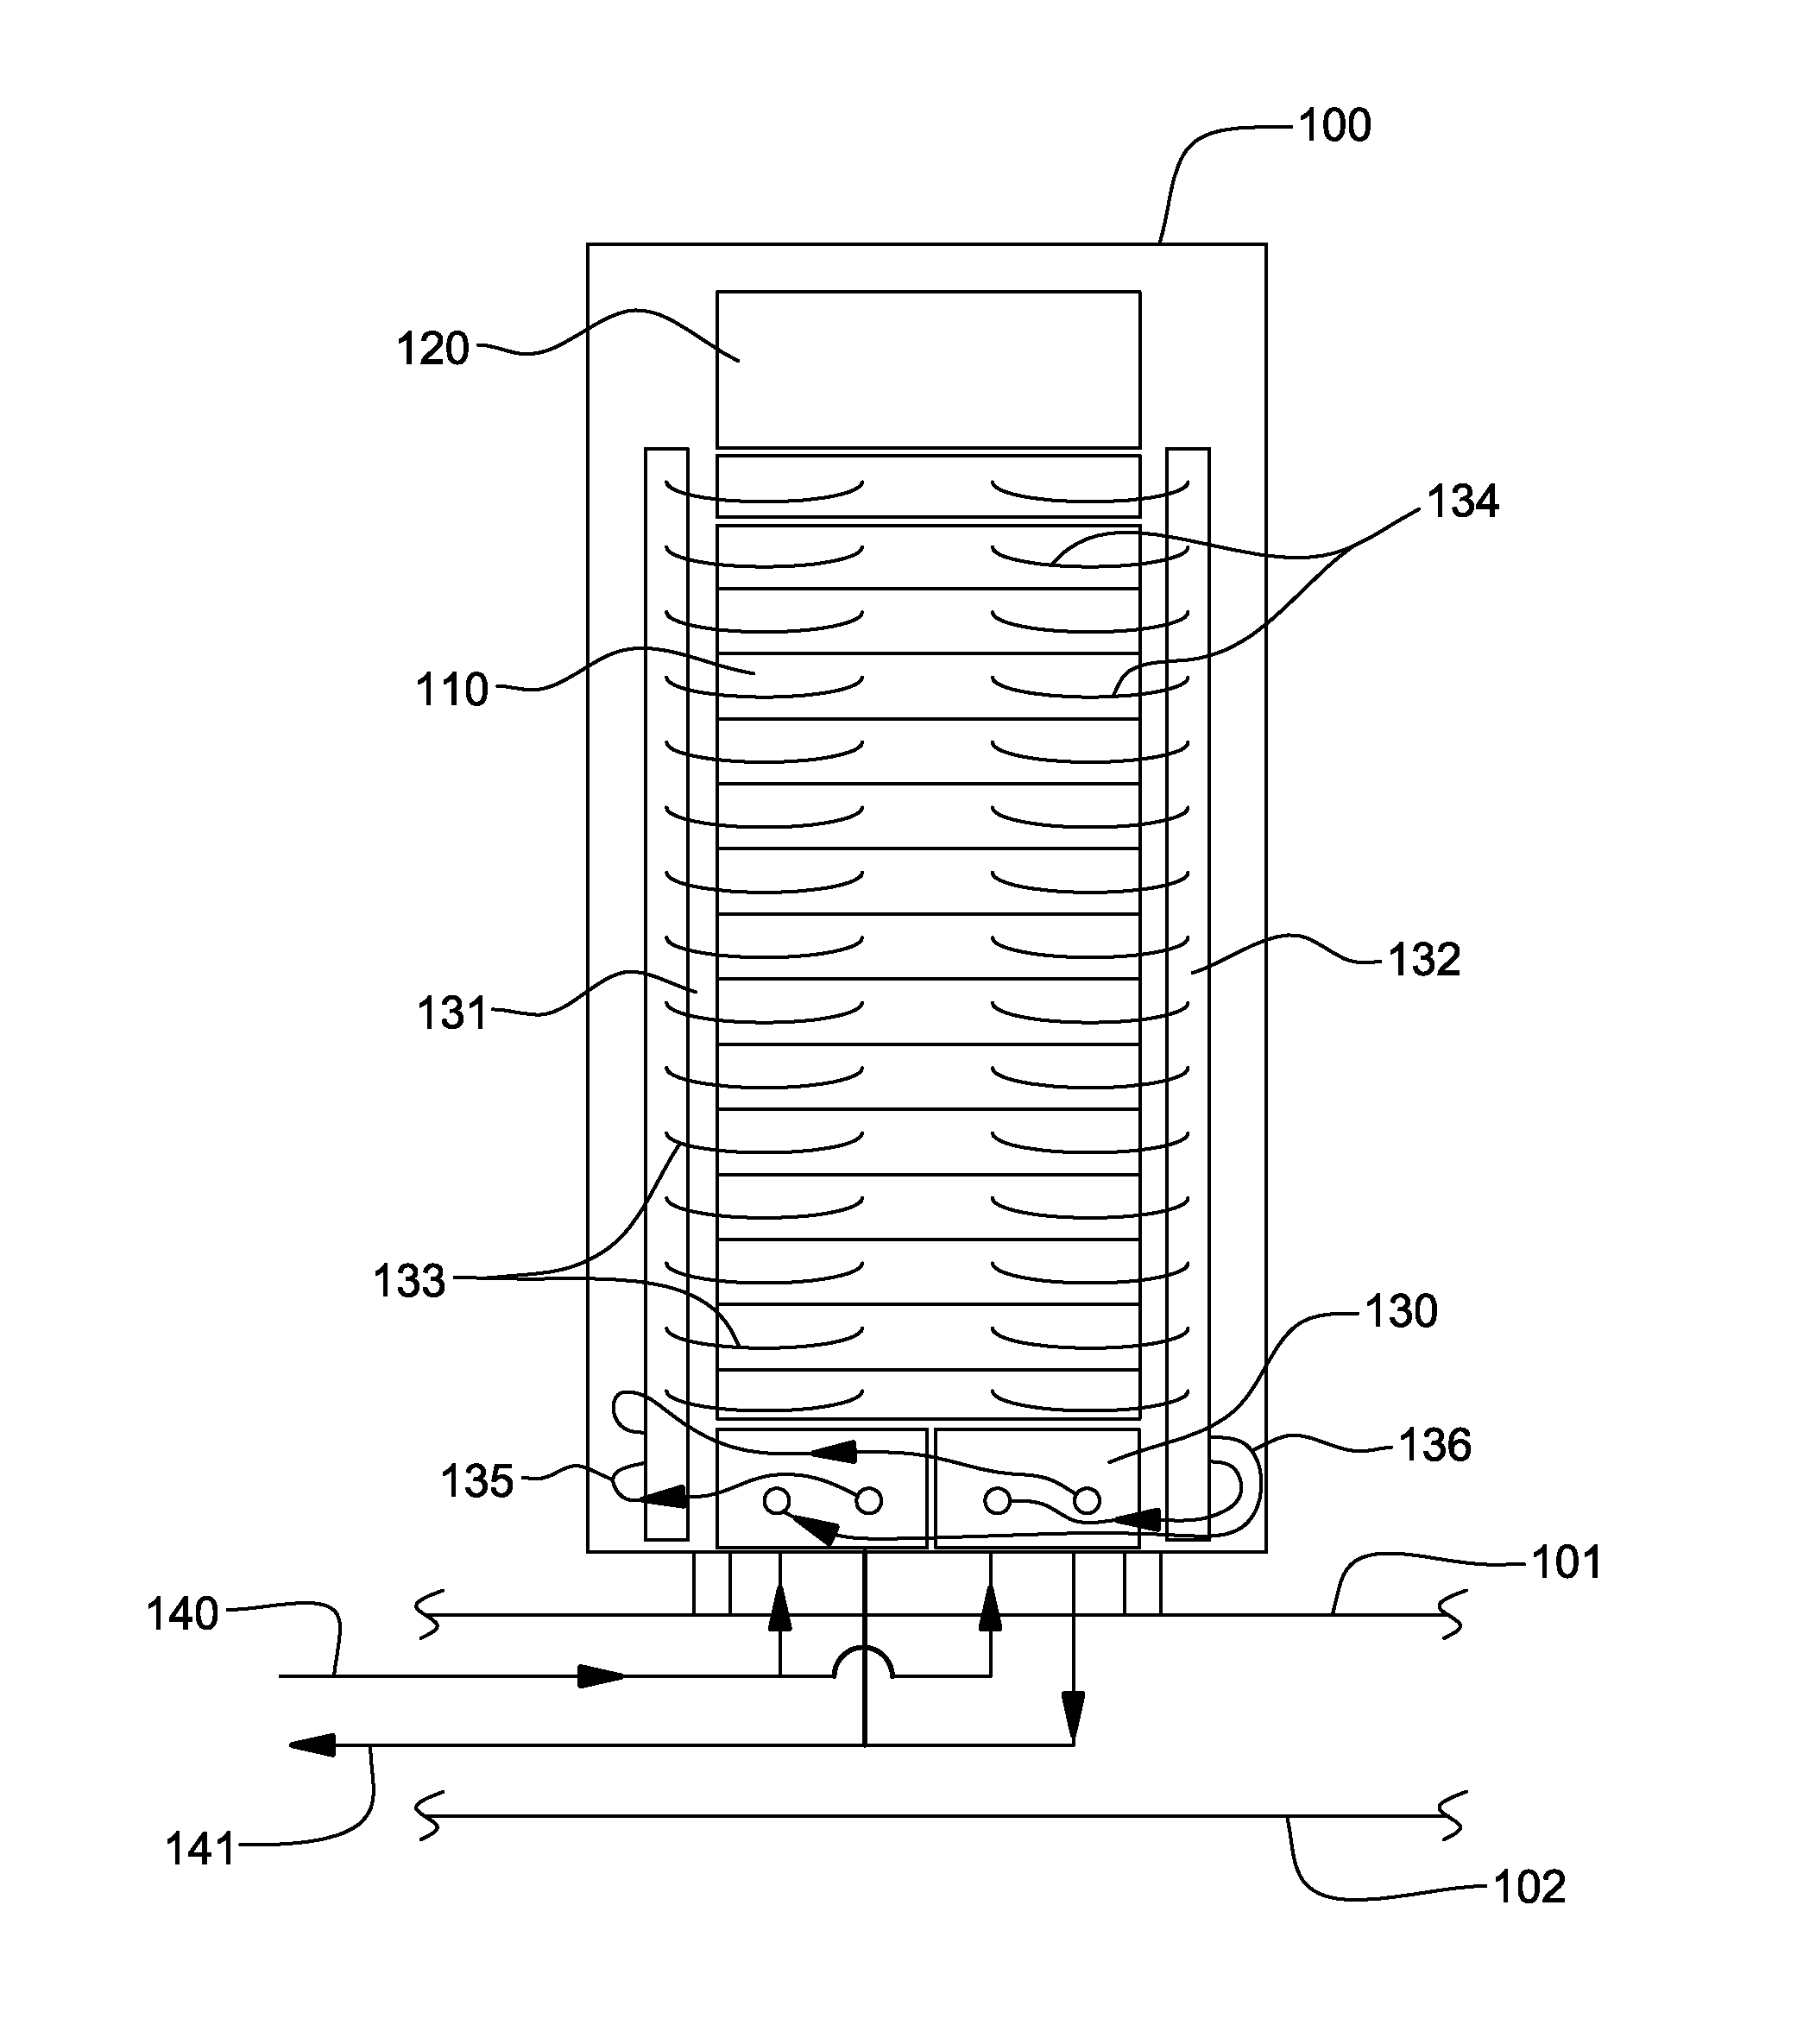 Apparatus and method for facilitating servicing of a liquid-cooled electronics rack